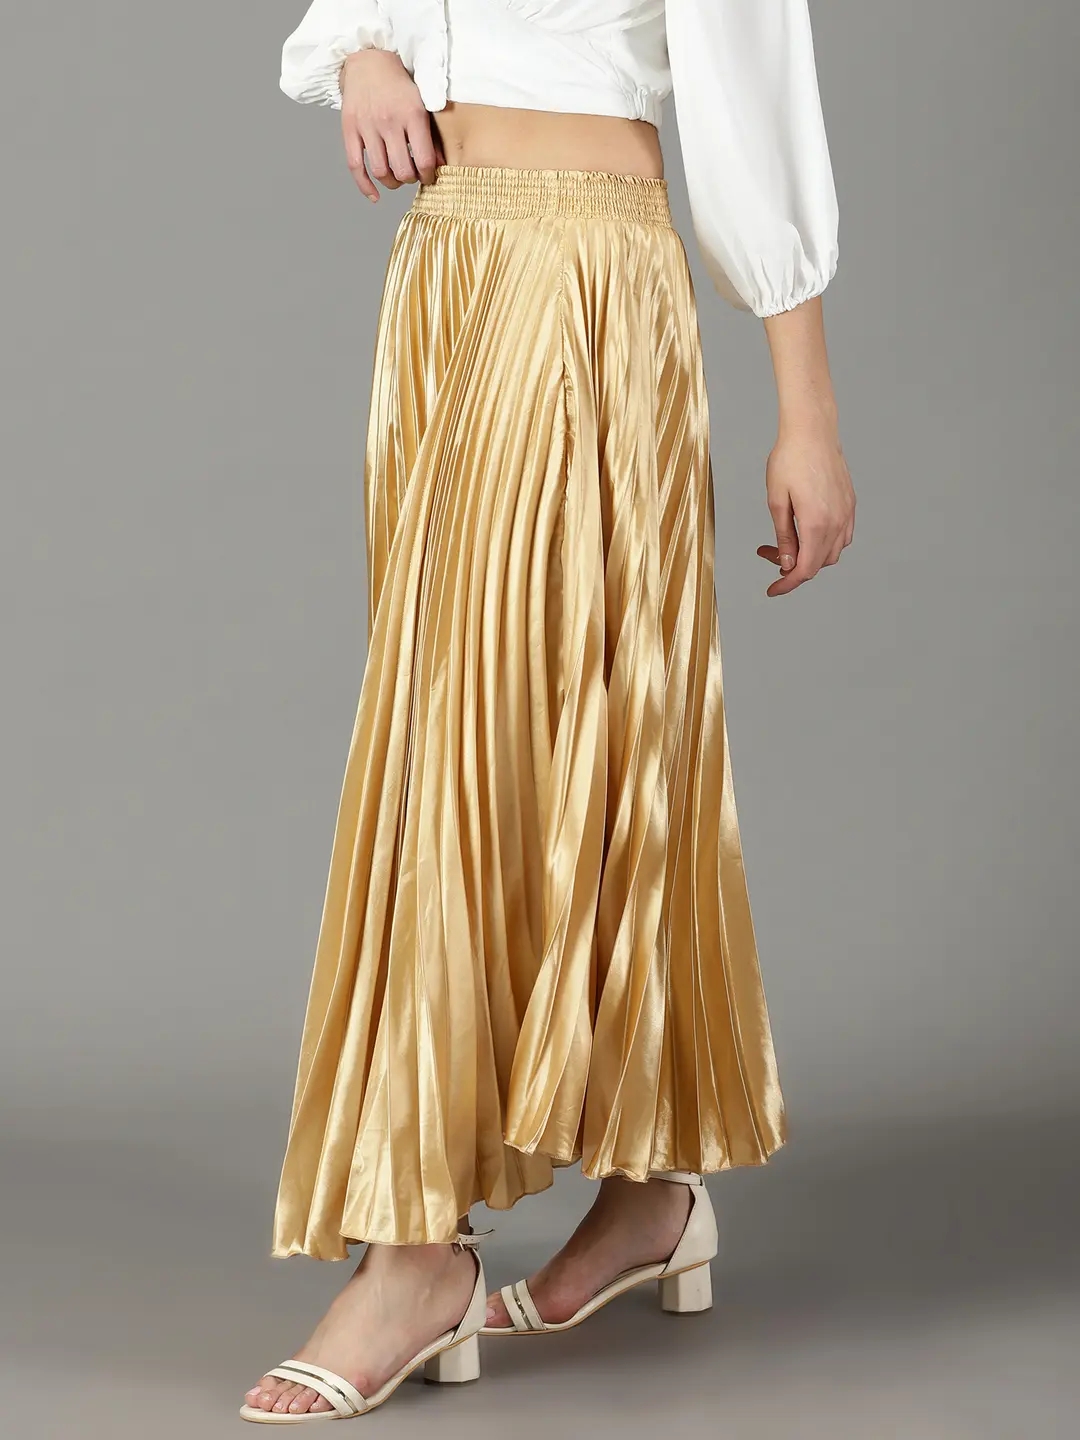 SHOWOFF Women's Solid Gold Satin Flared Skirt